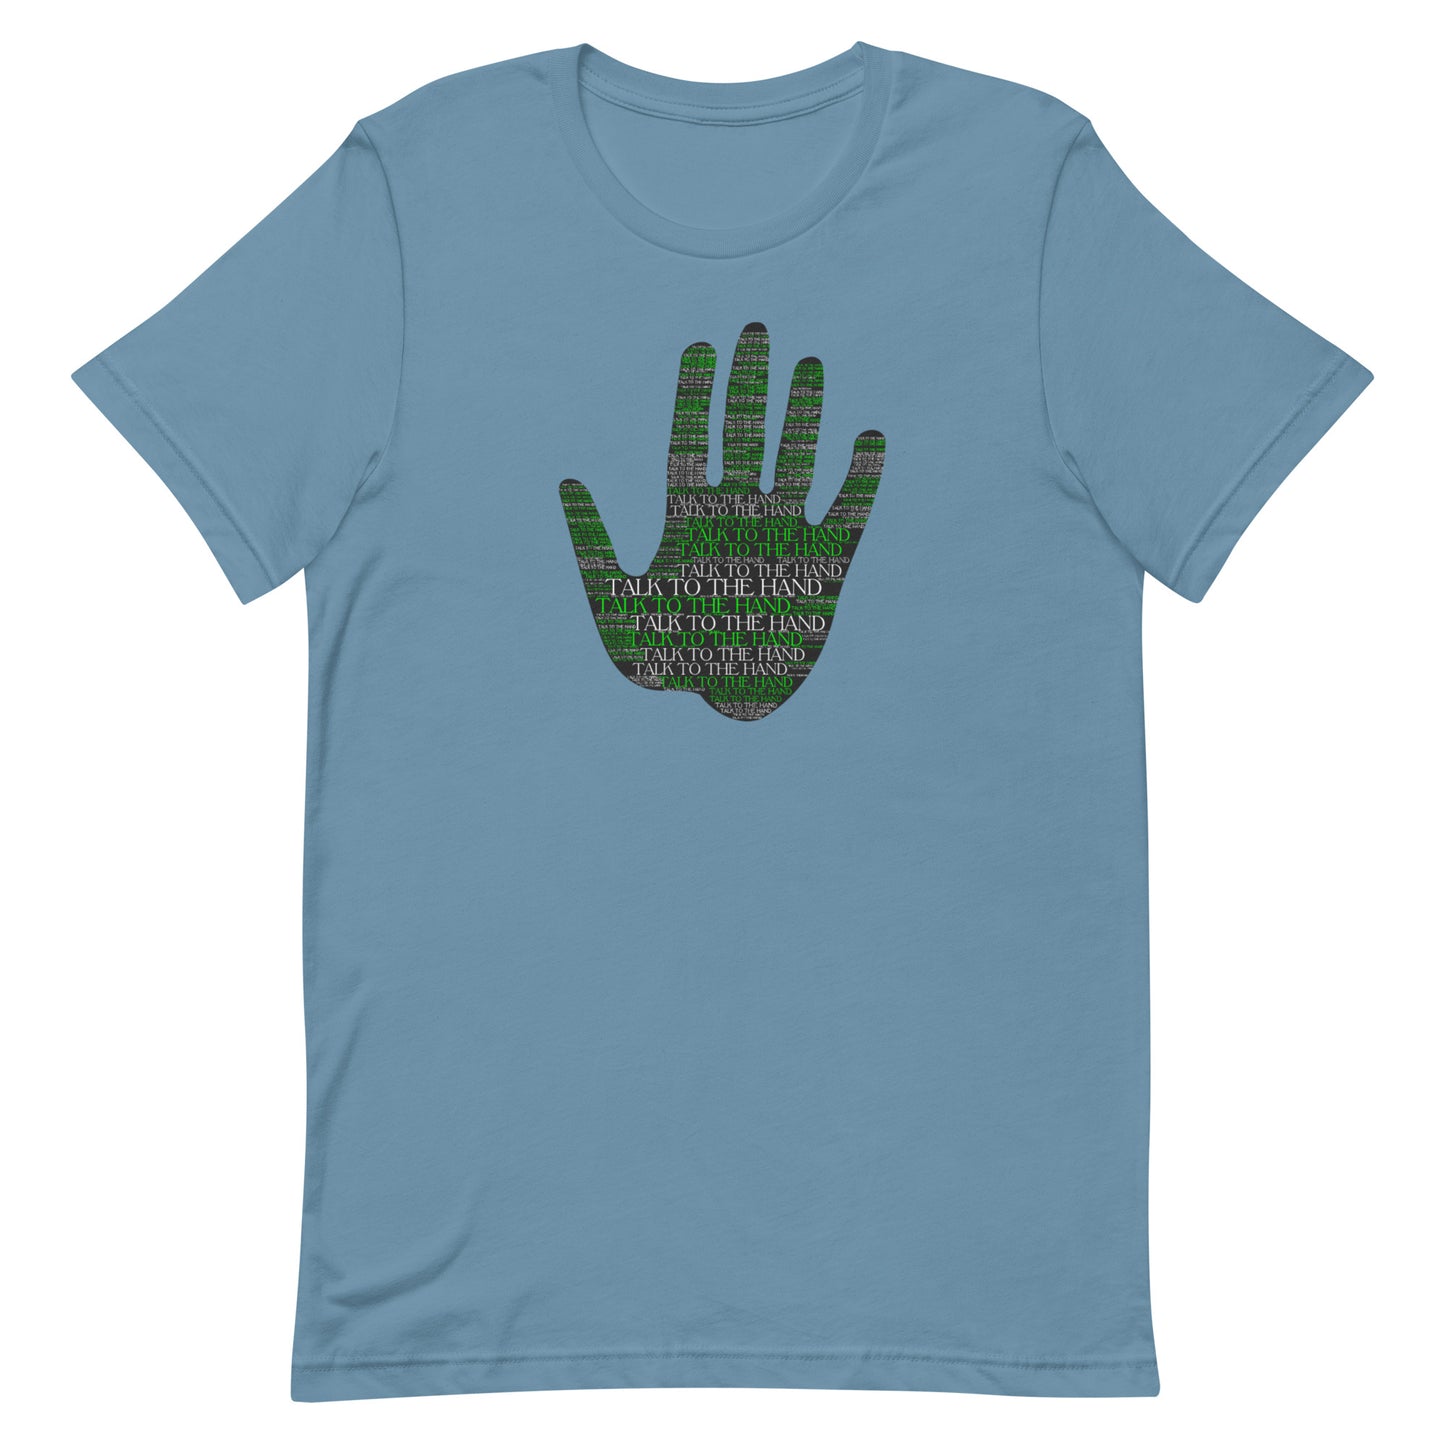 Talk to the Hand - LIME - S-4XL